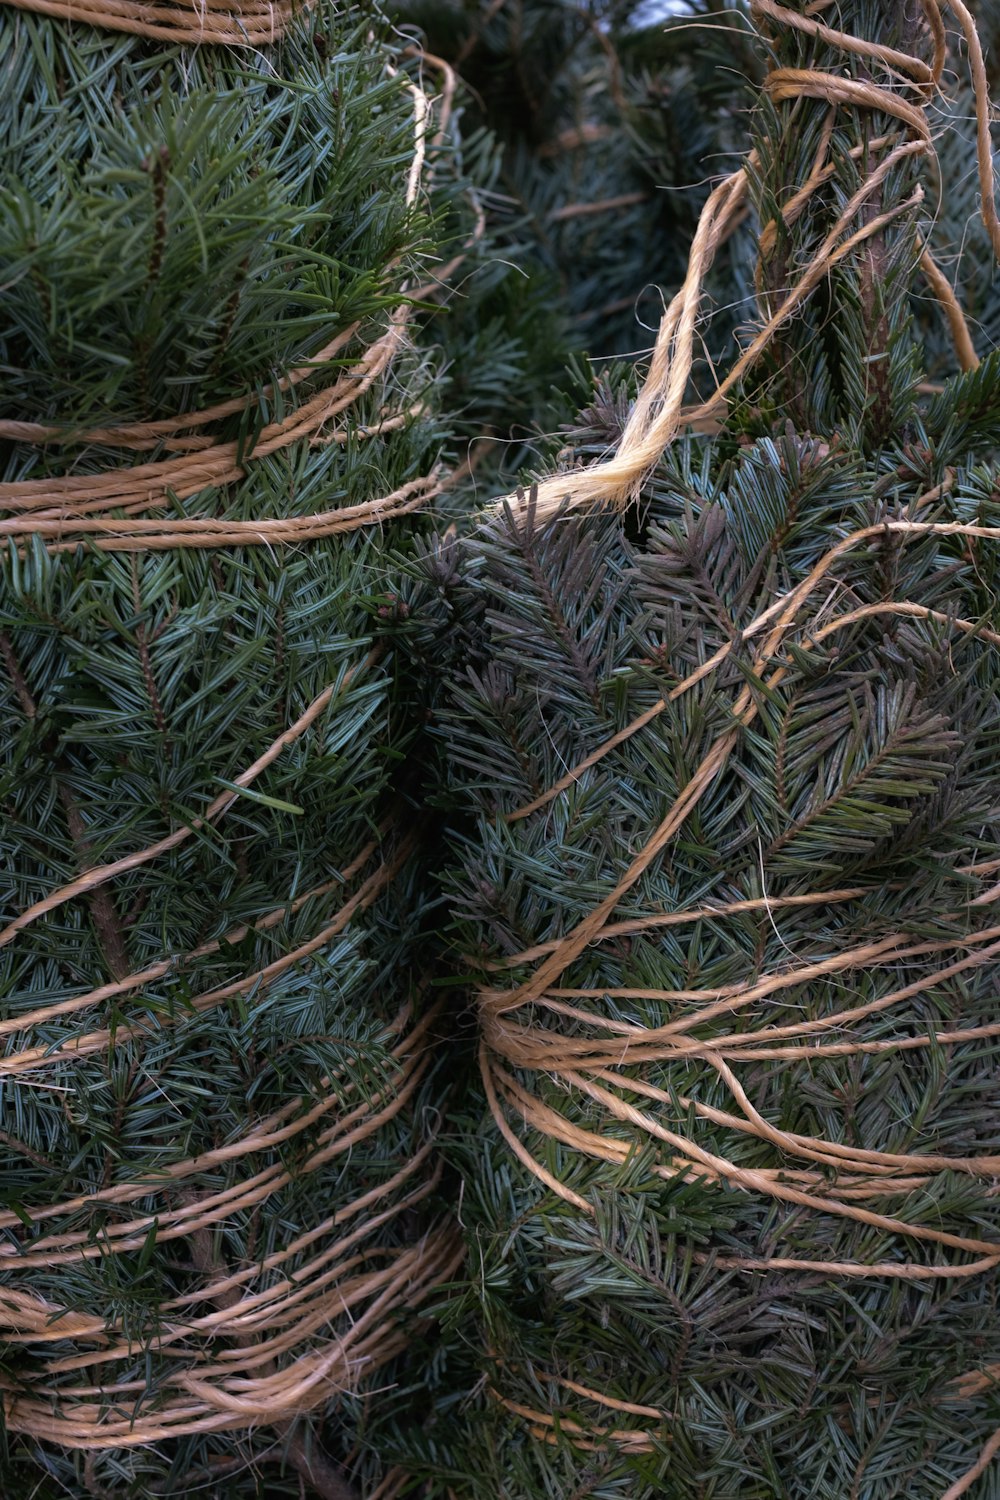 a close up of some pine needles